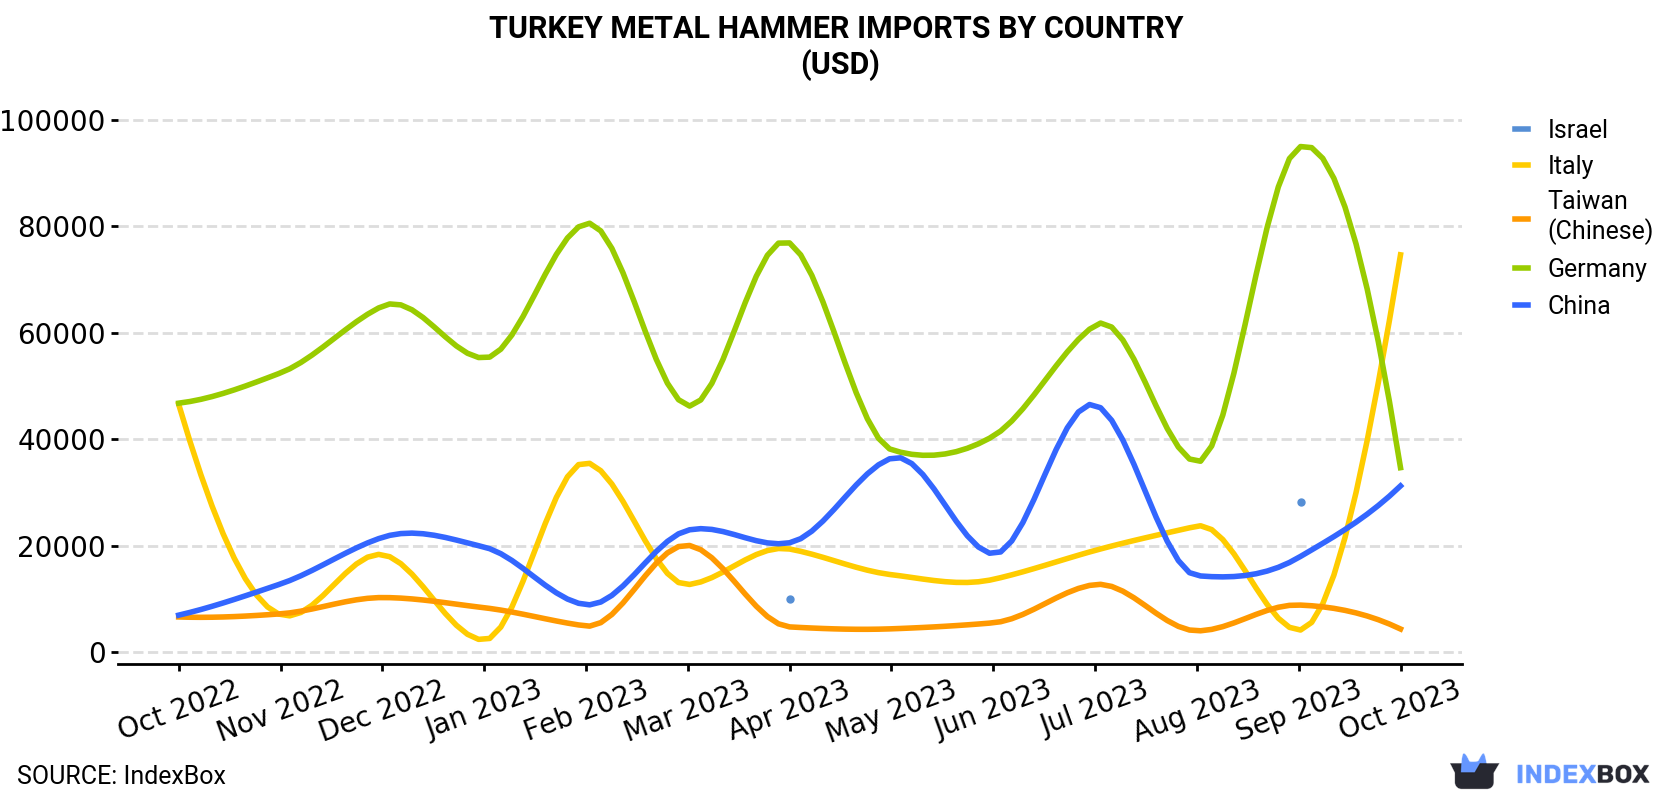 Turkey Metal Hammer Imports By Country (USD)